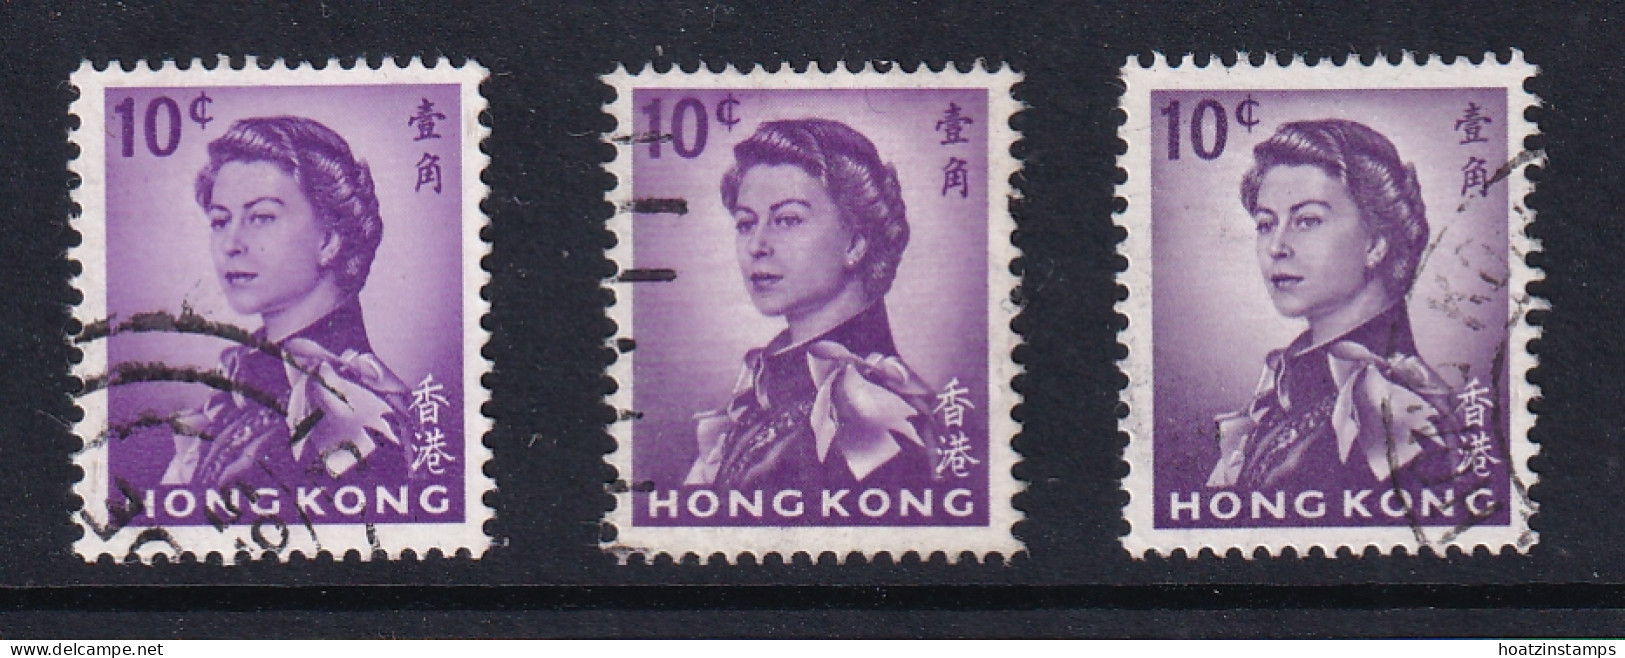 Hong Kong: 1962/73   QE II     SG197/197a/197ab      10c     Used - Used Stamps